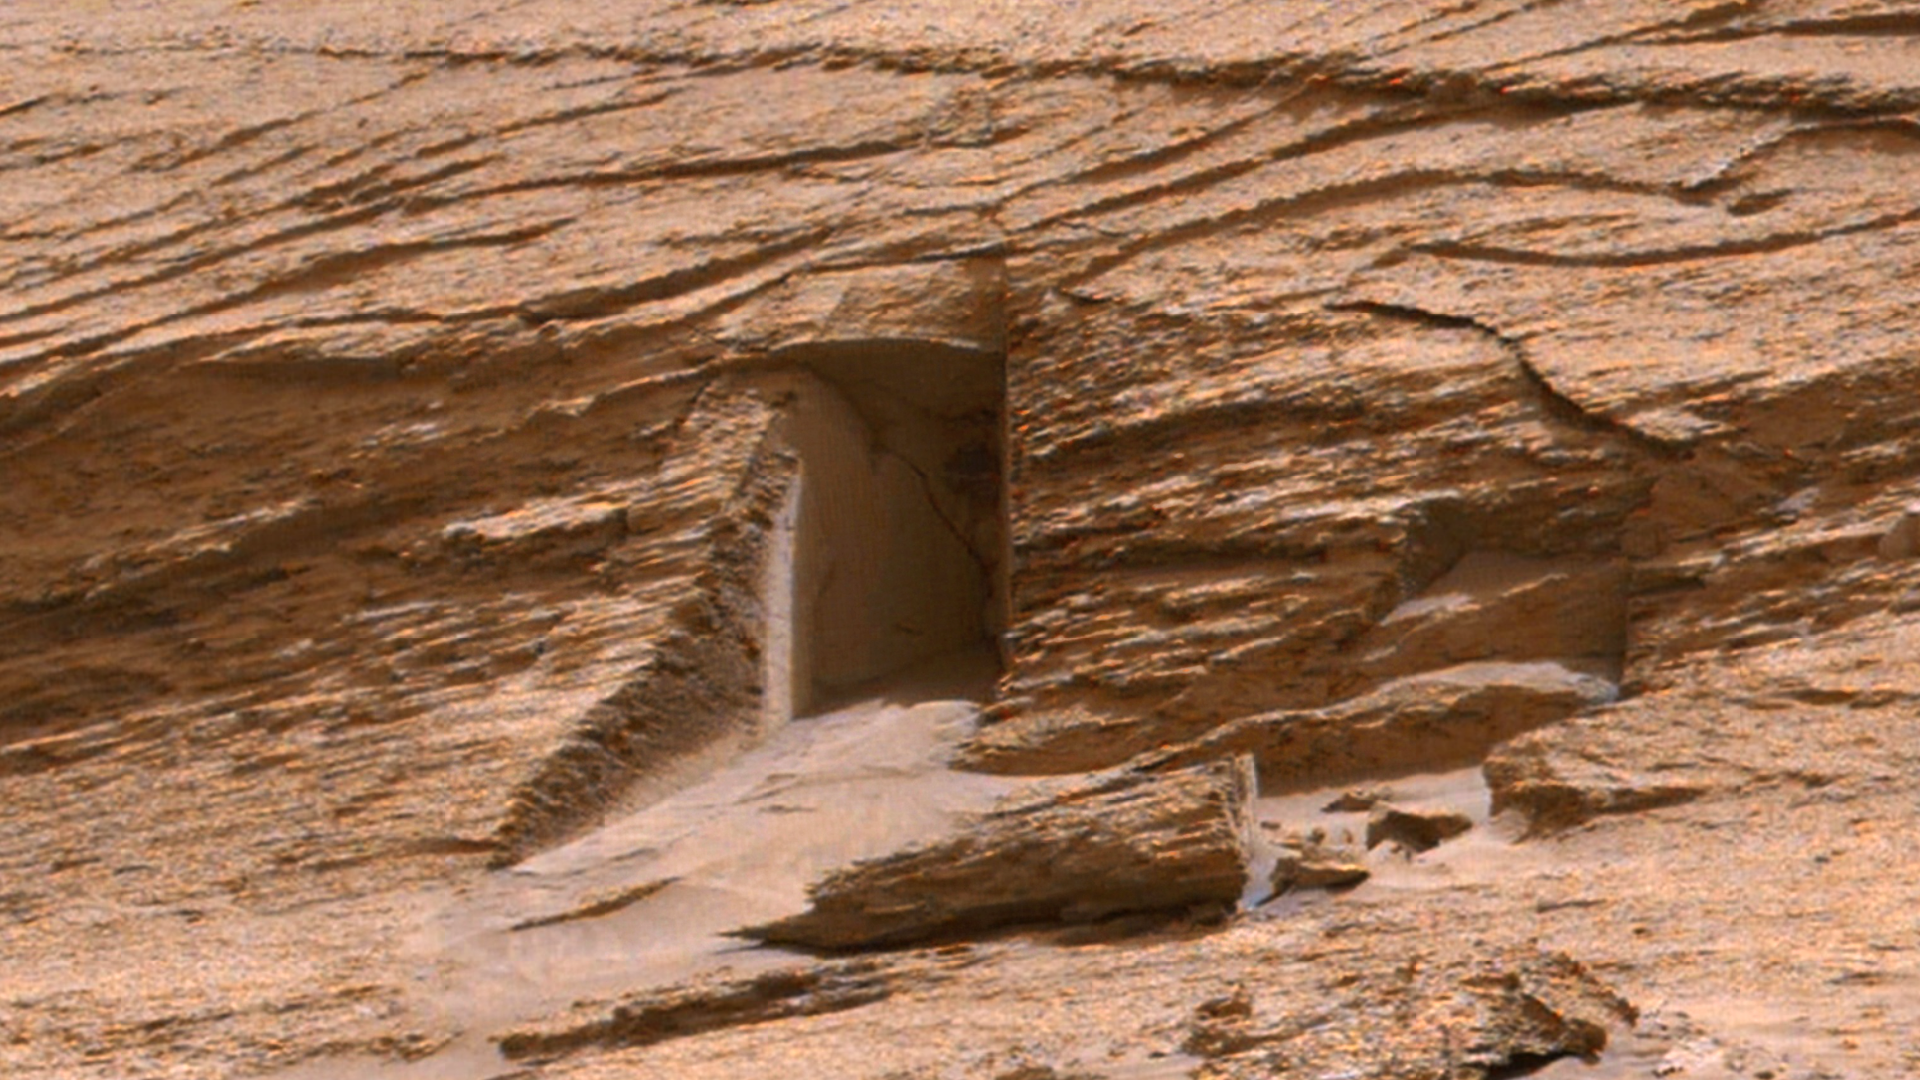 From 'COLOUR UPDATE | ROVER CURIOSITY Possible Entranceway Photographed on Sol 3466' (click for larger image at actual size 1:1 scale)